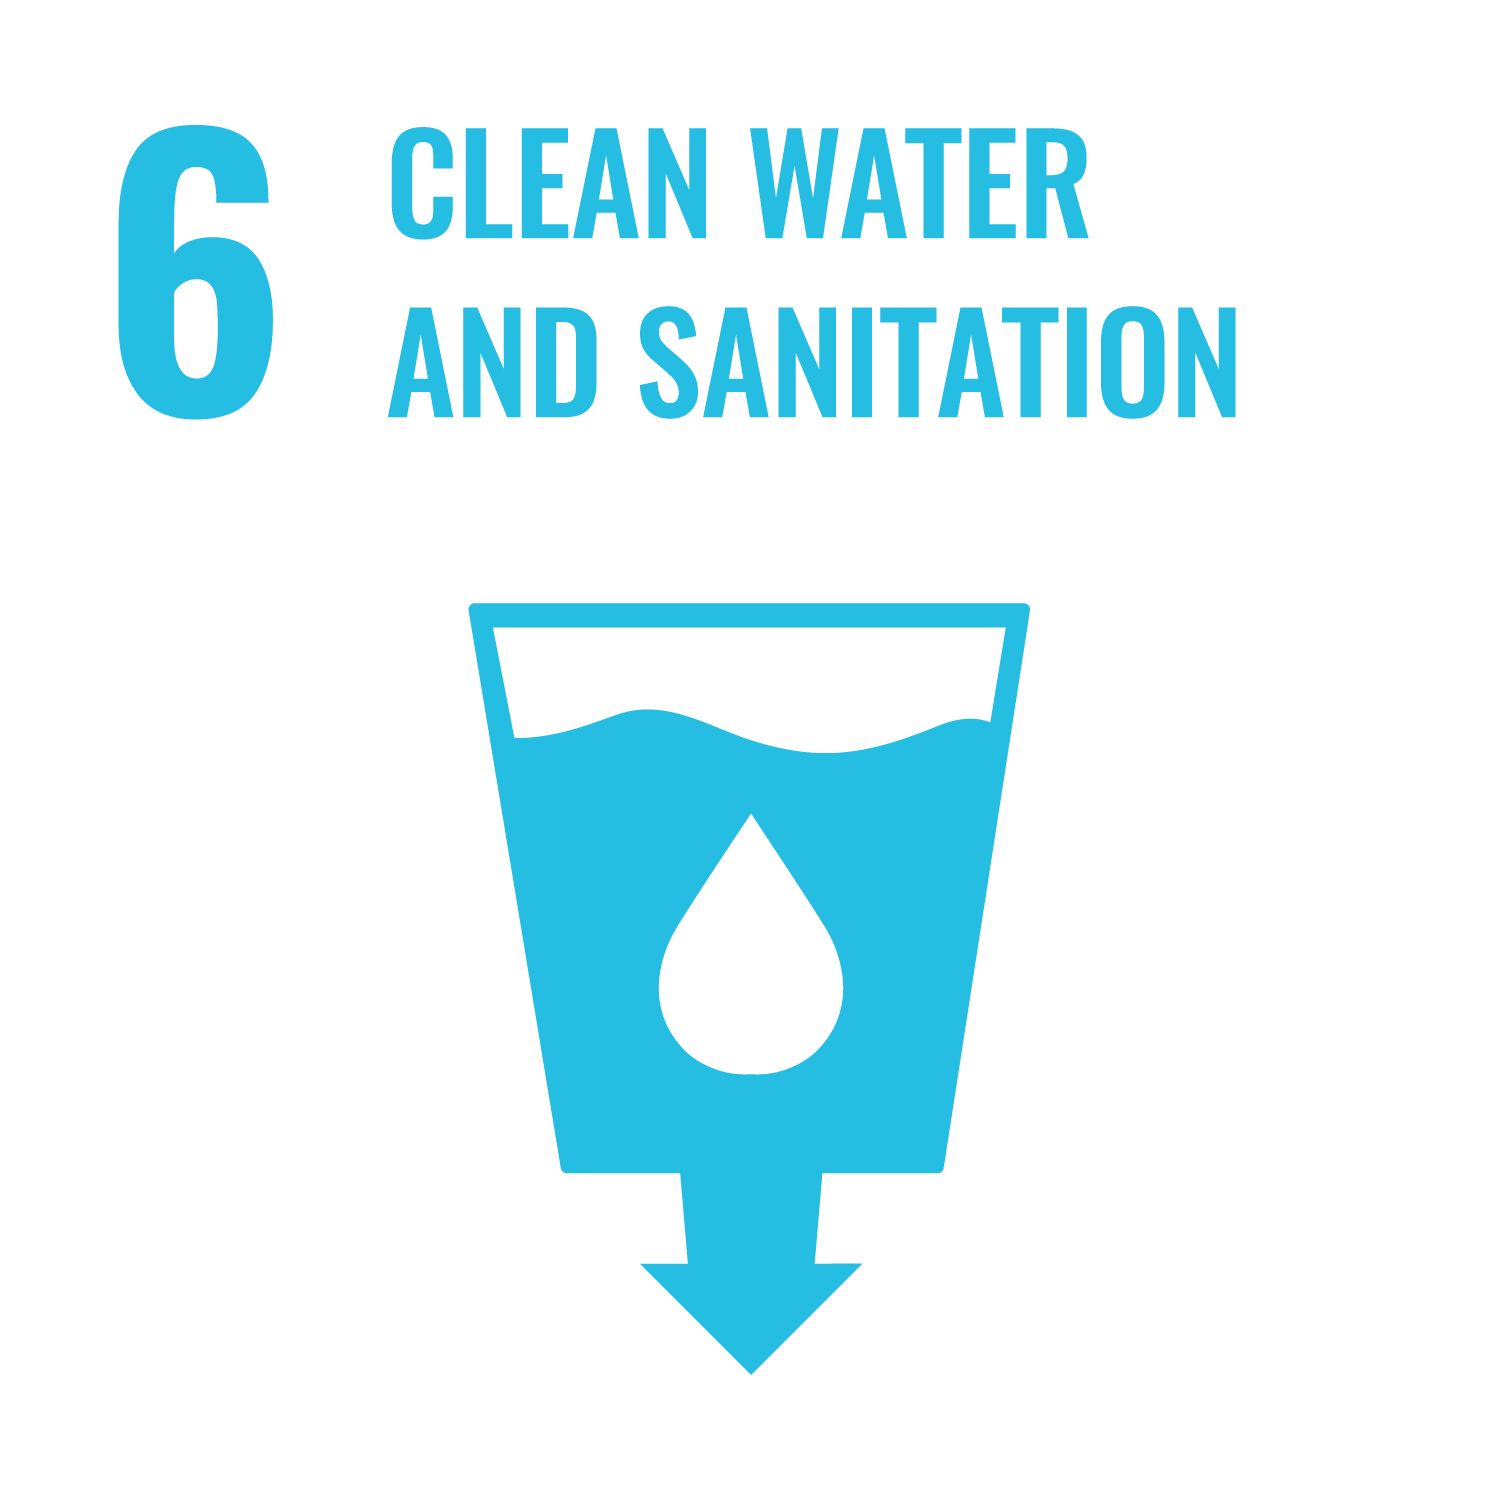 a light blue vessel with water droplet represents Goal 6: Clean Water and Sanitation